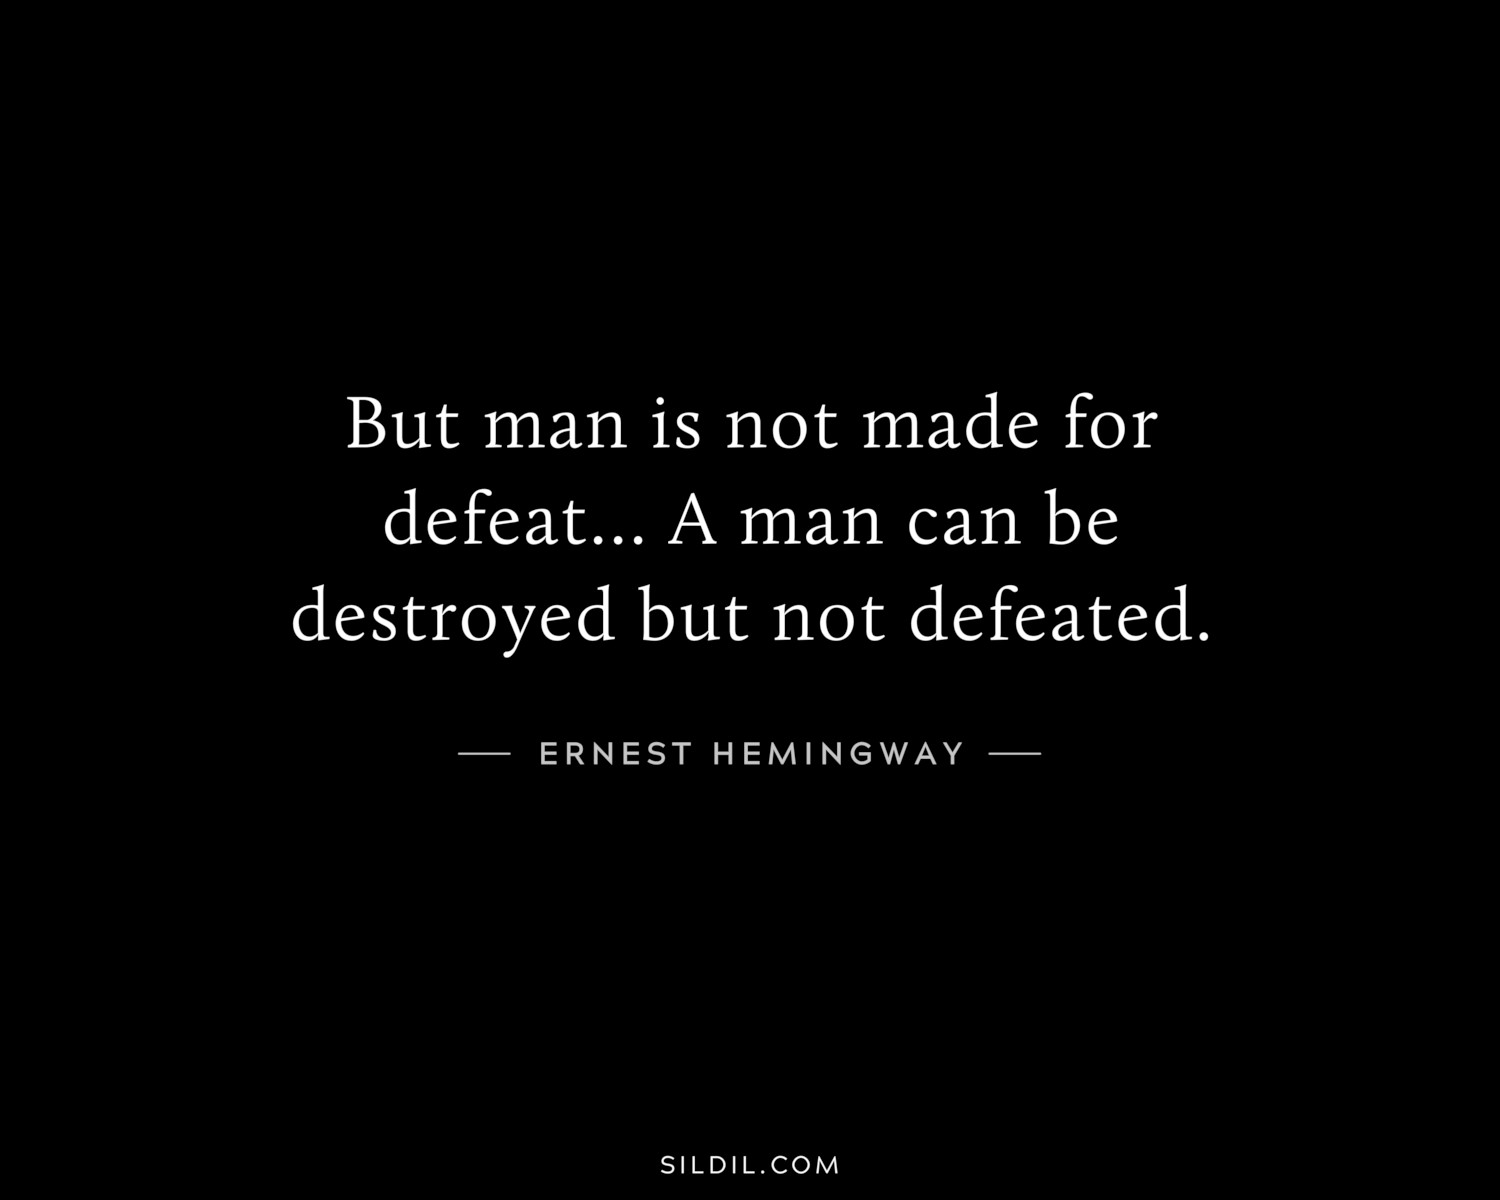 But man is not made for defeat… A man can be destroyed but not defeated.